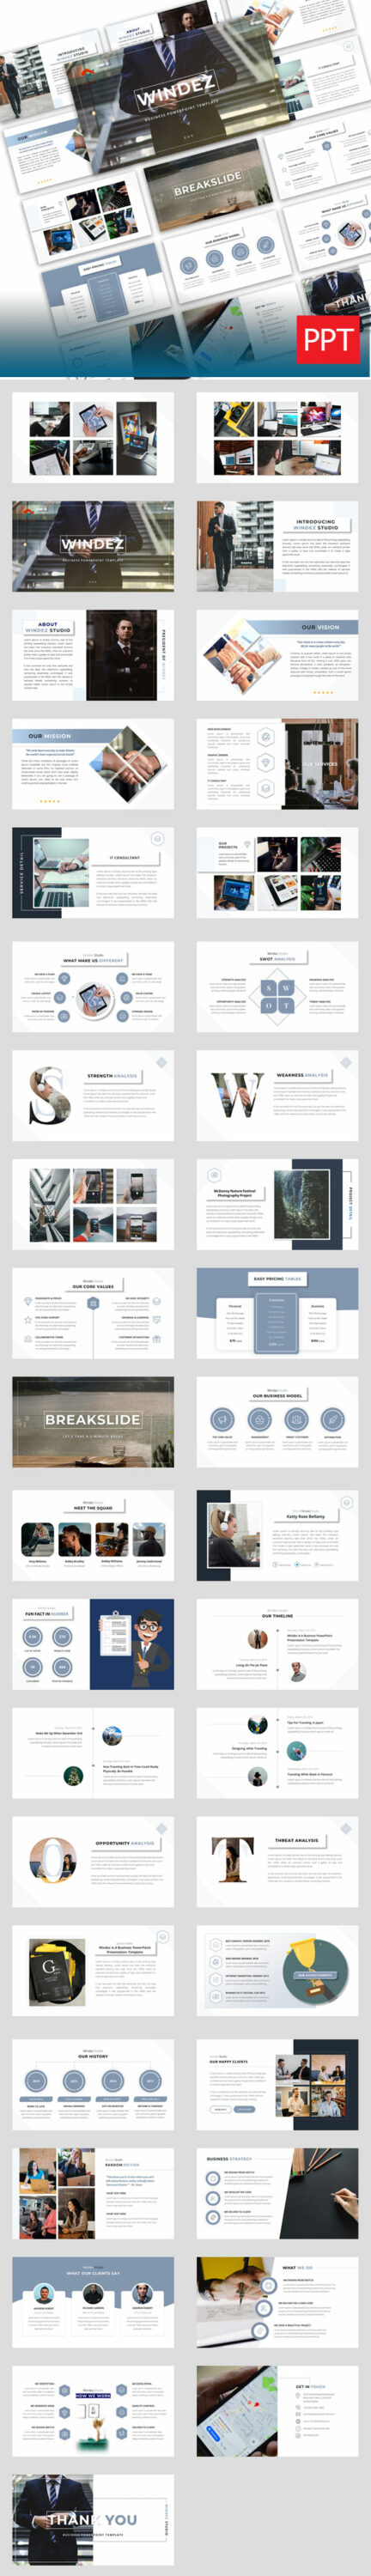 Windez Business PowerPoint Template preview media.